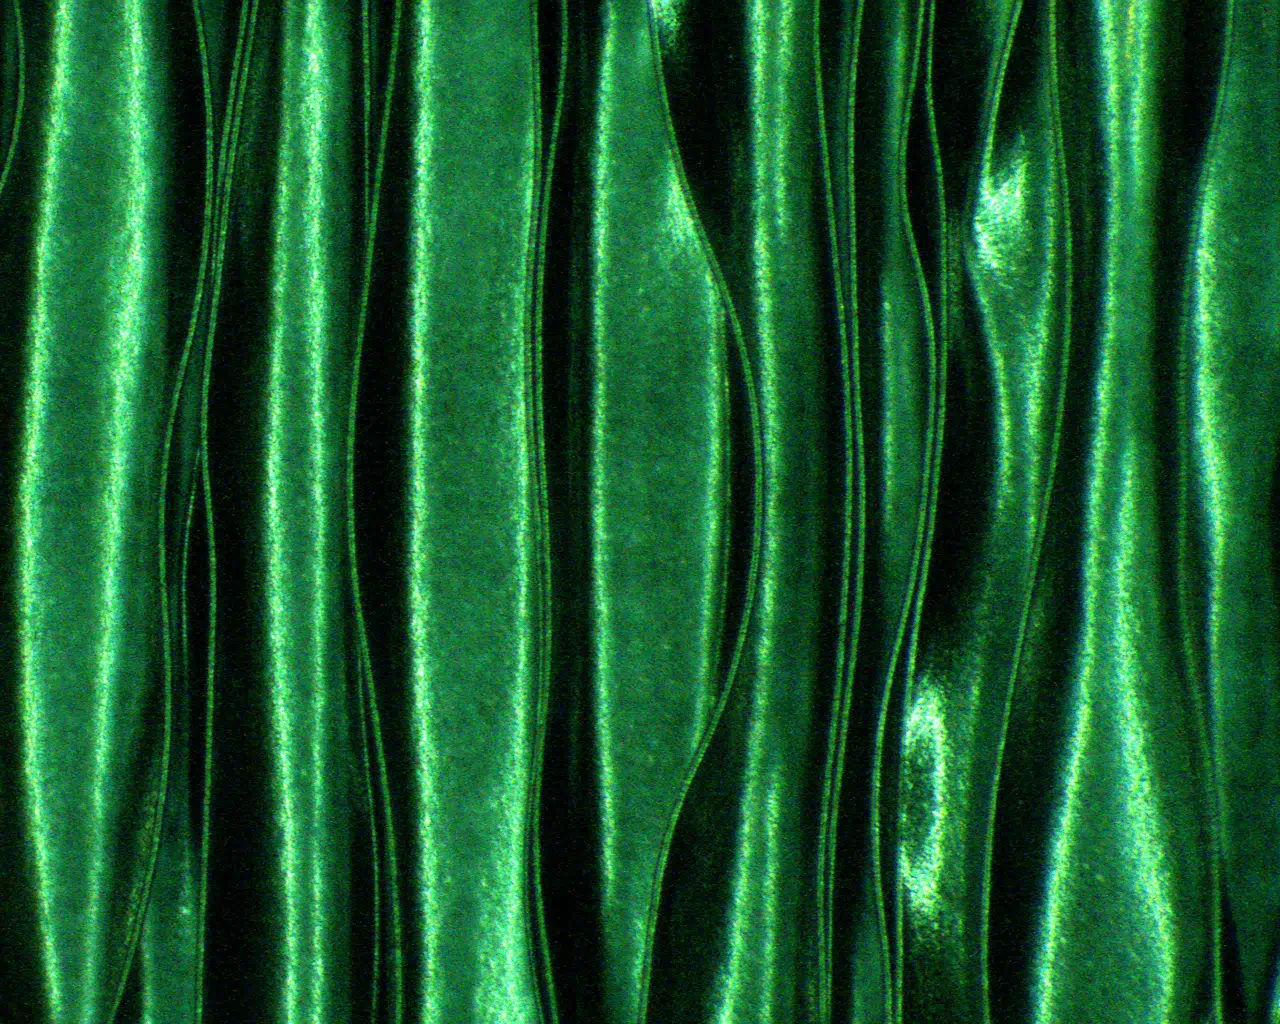 An optical microscope image shows what looks like a wavy green fabric but is actually a “wrinkly” electrode that could help power flexible electronics.